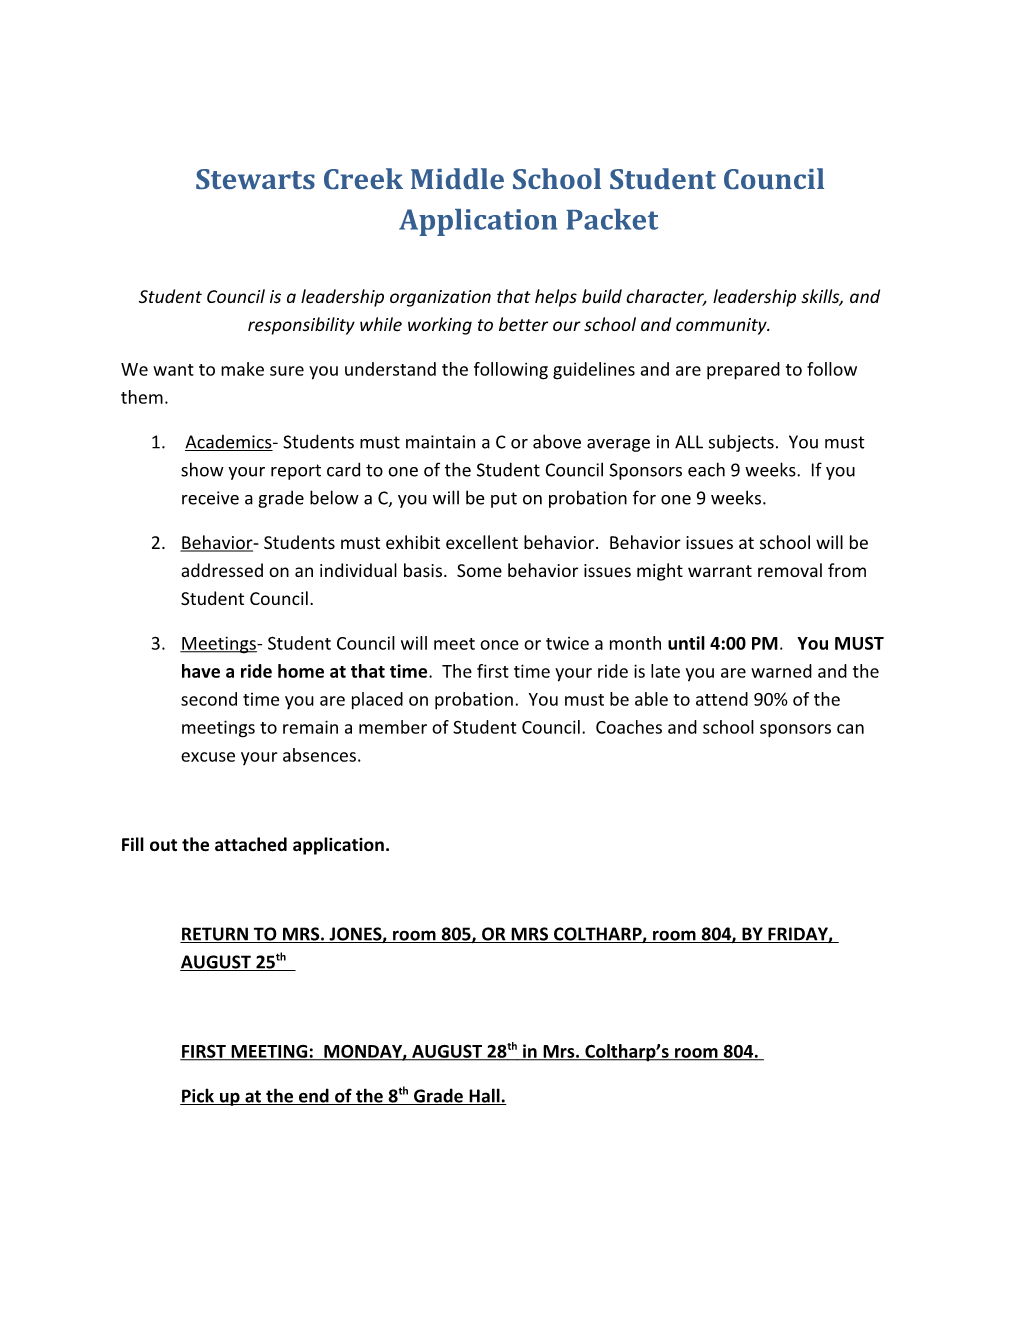 Stewarts Creek Middle School Student Council Application Packet